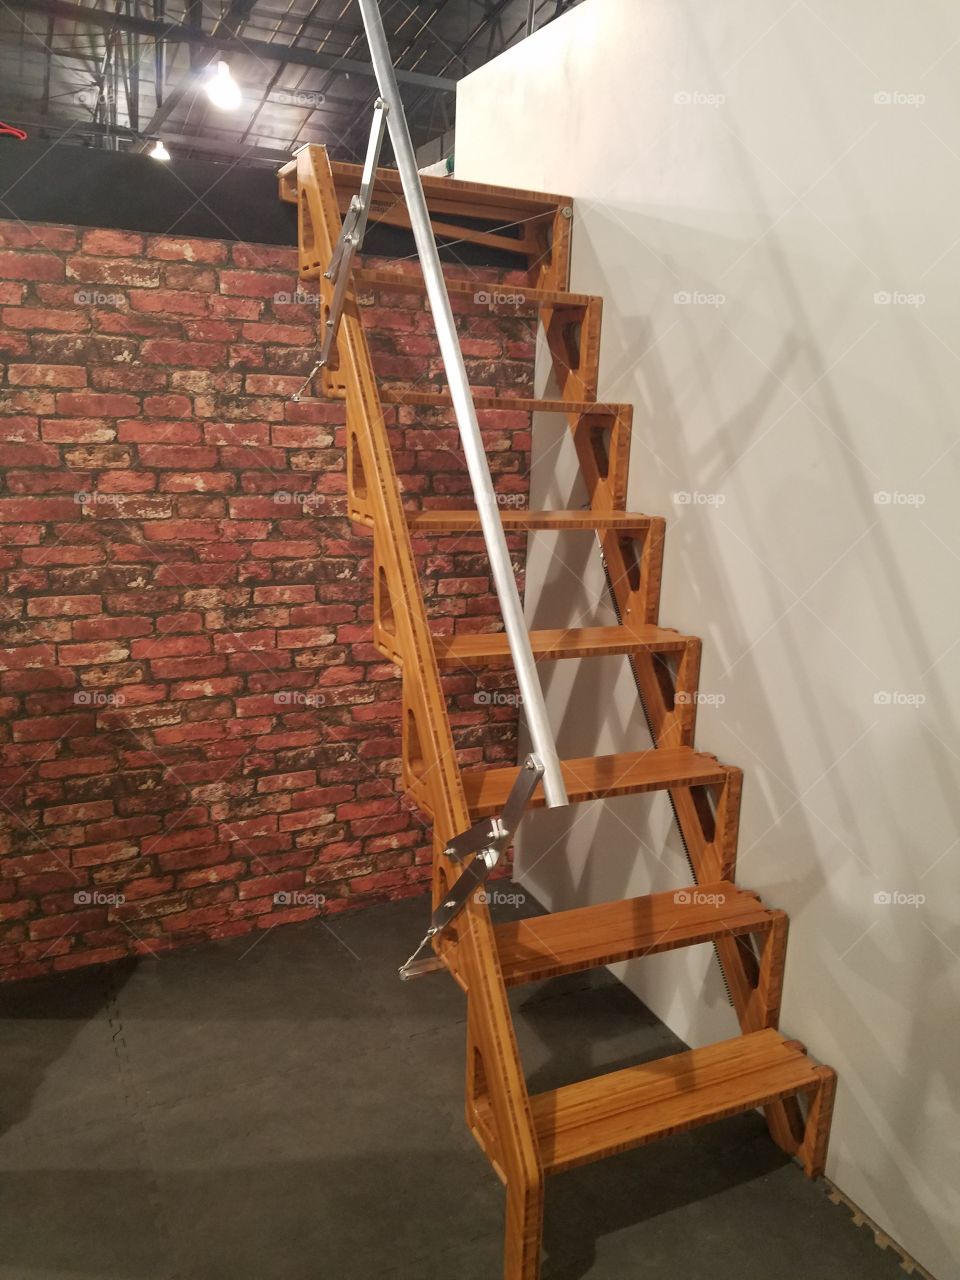 A set of stairs that fold up tight to the wall. They are custom built for the specifications of your space.   Designed for tiny homes.